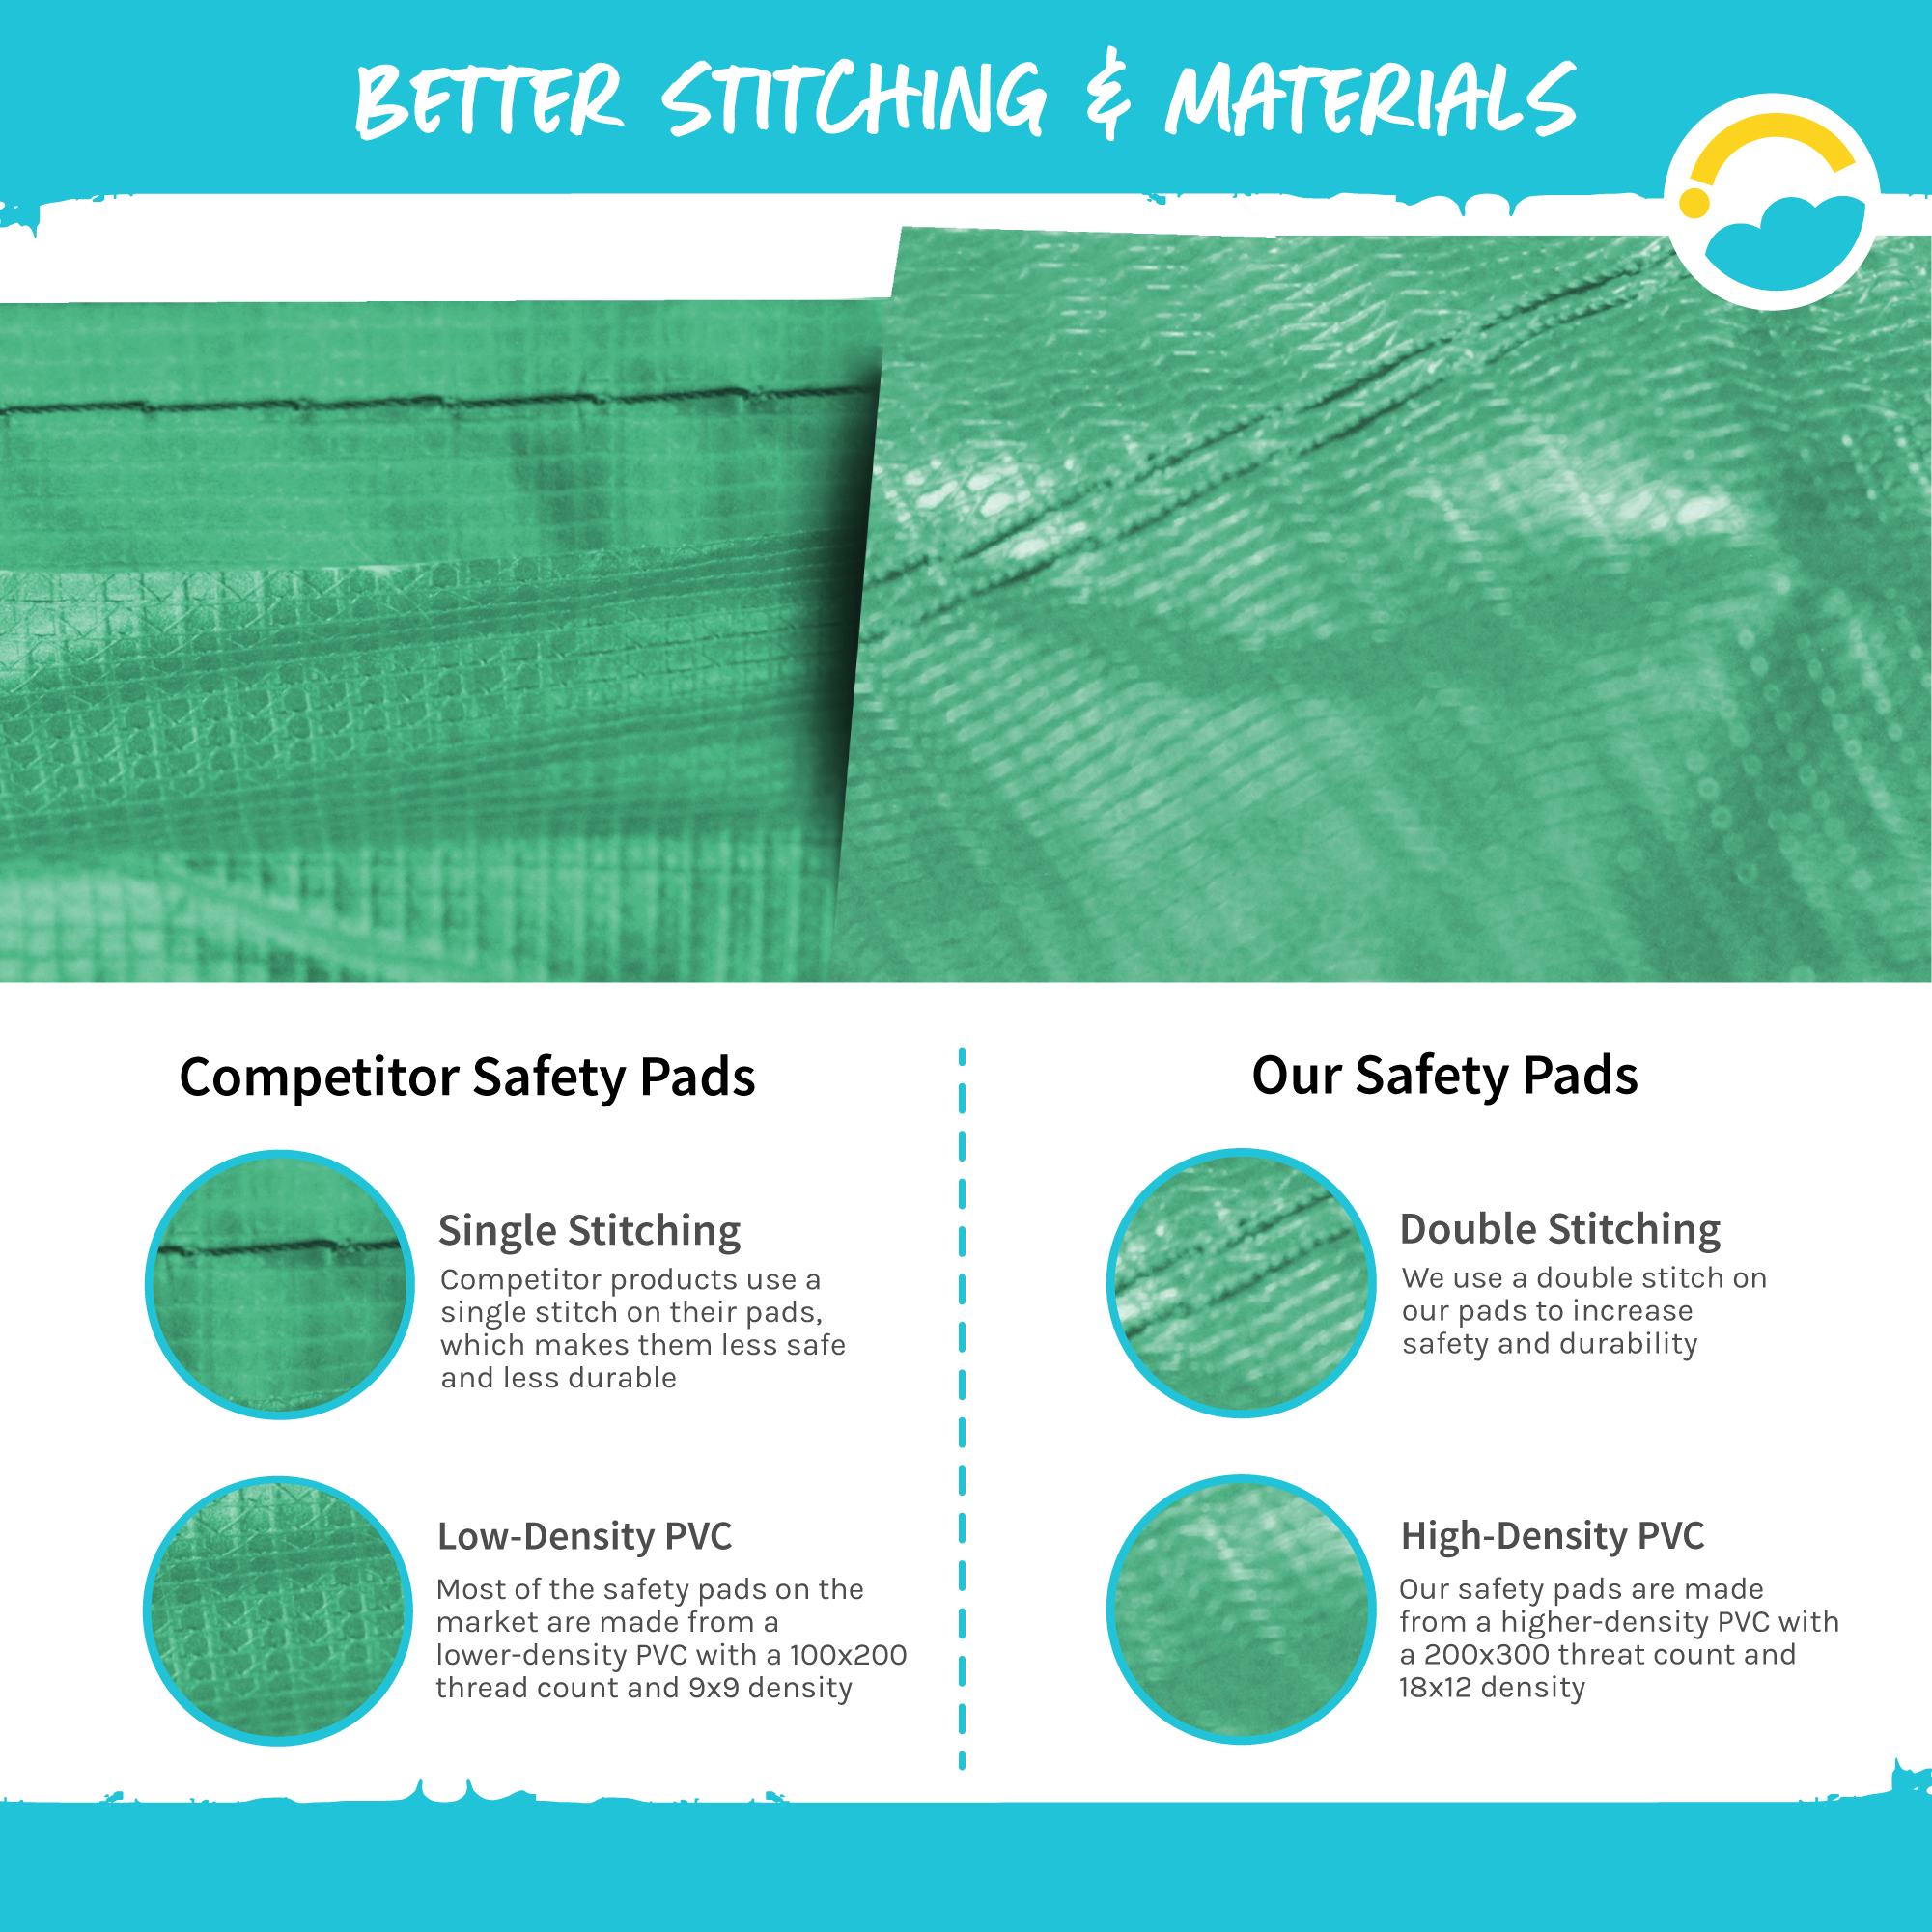 Better Stitching and Materials: Competitor Safety Pads Single Stitching and Low-Density PVC (100x200 thread count and 9x9 density). Our Safety Pads: Double Stitching and High-Density PVC (200x300 thread count and 18x12 density)